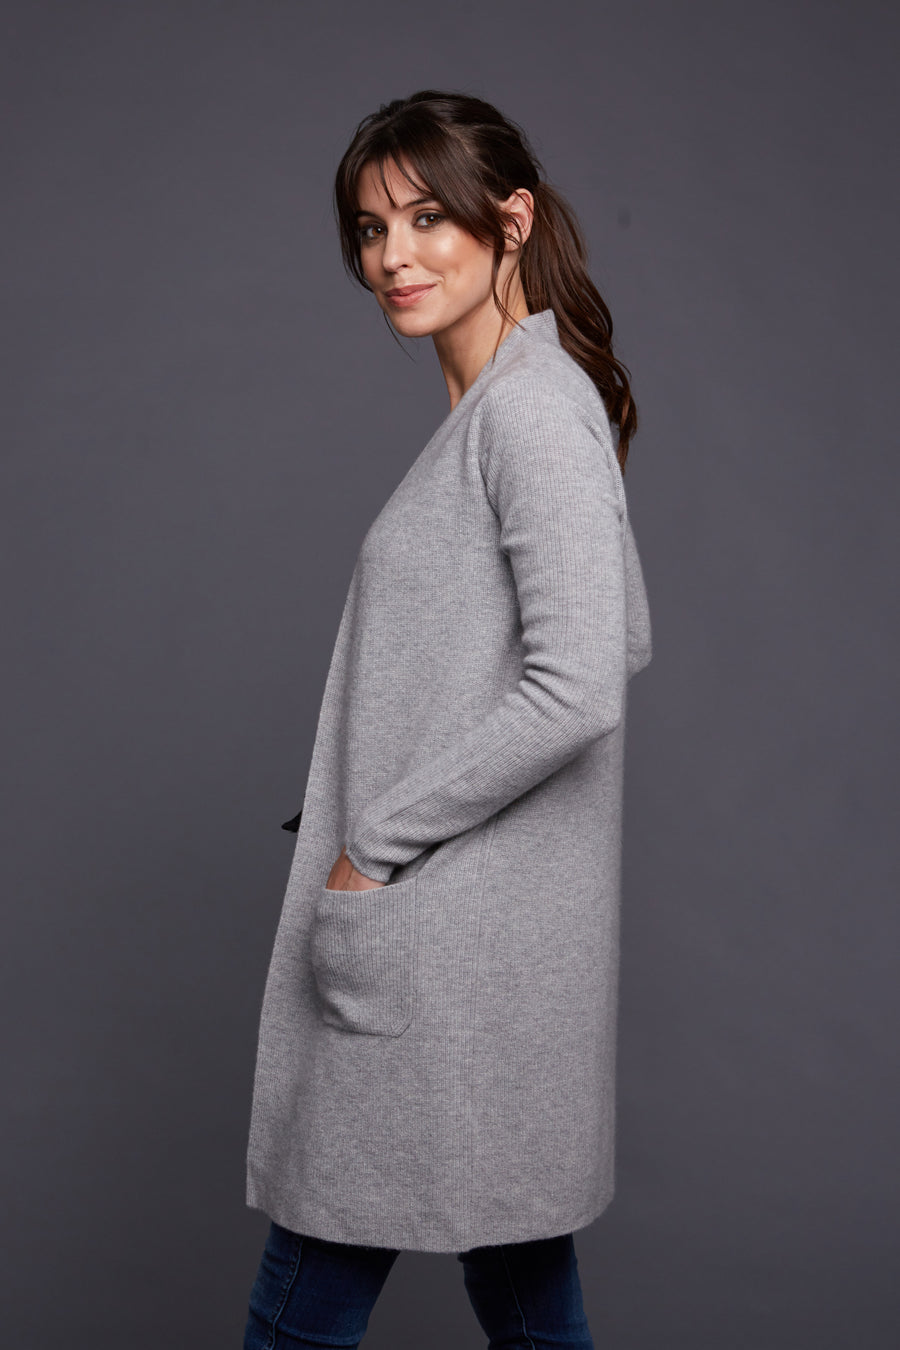 pine cashmere morgan women's 100% pure cashmere cardigan sweater in grey